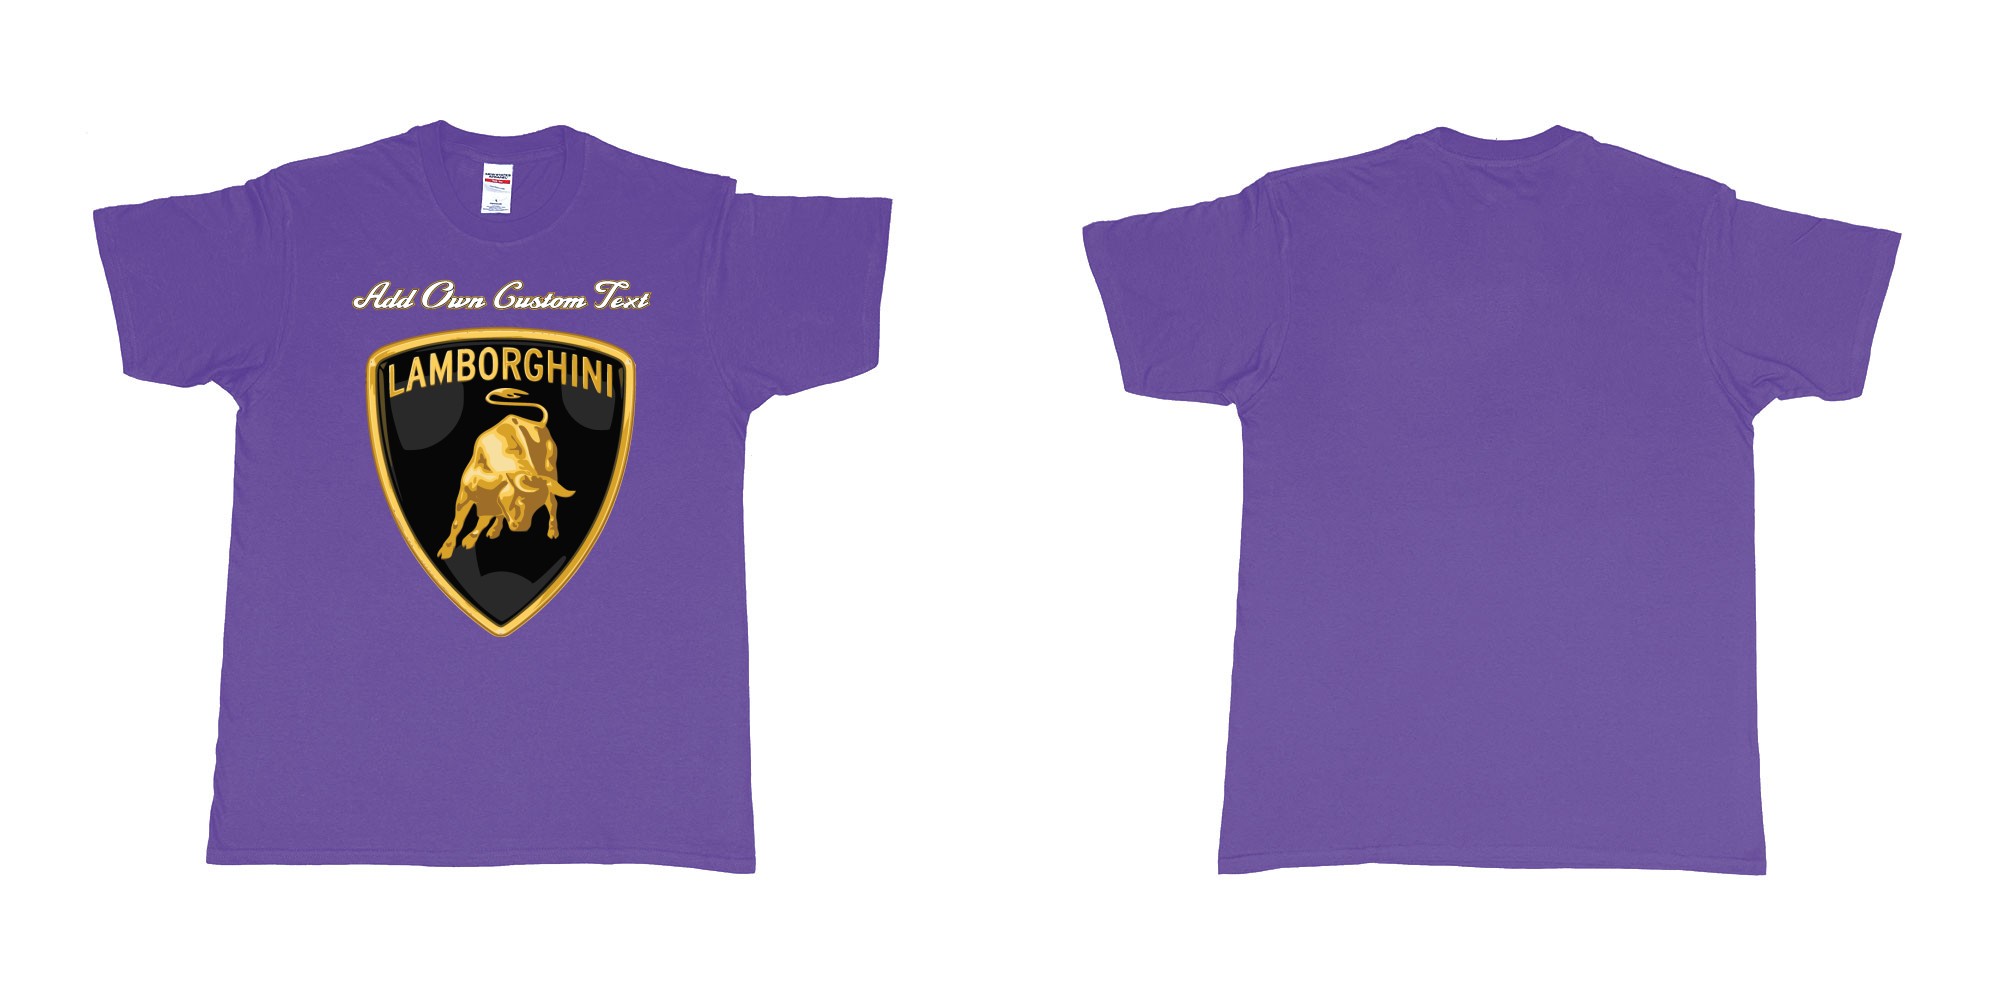 Custom tshirt design lamborghini logo tshirt printing add own text in fabric color purple choice your own text made in Bali by The Pirate Way